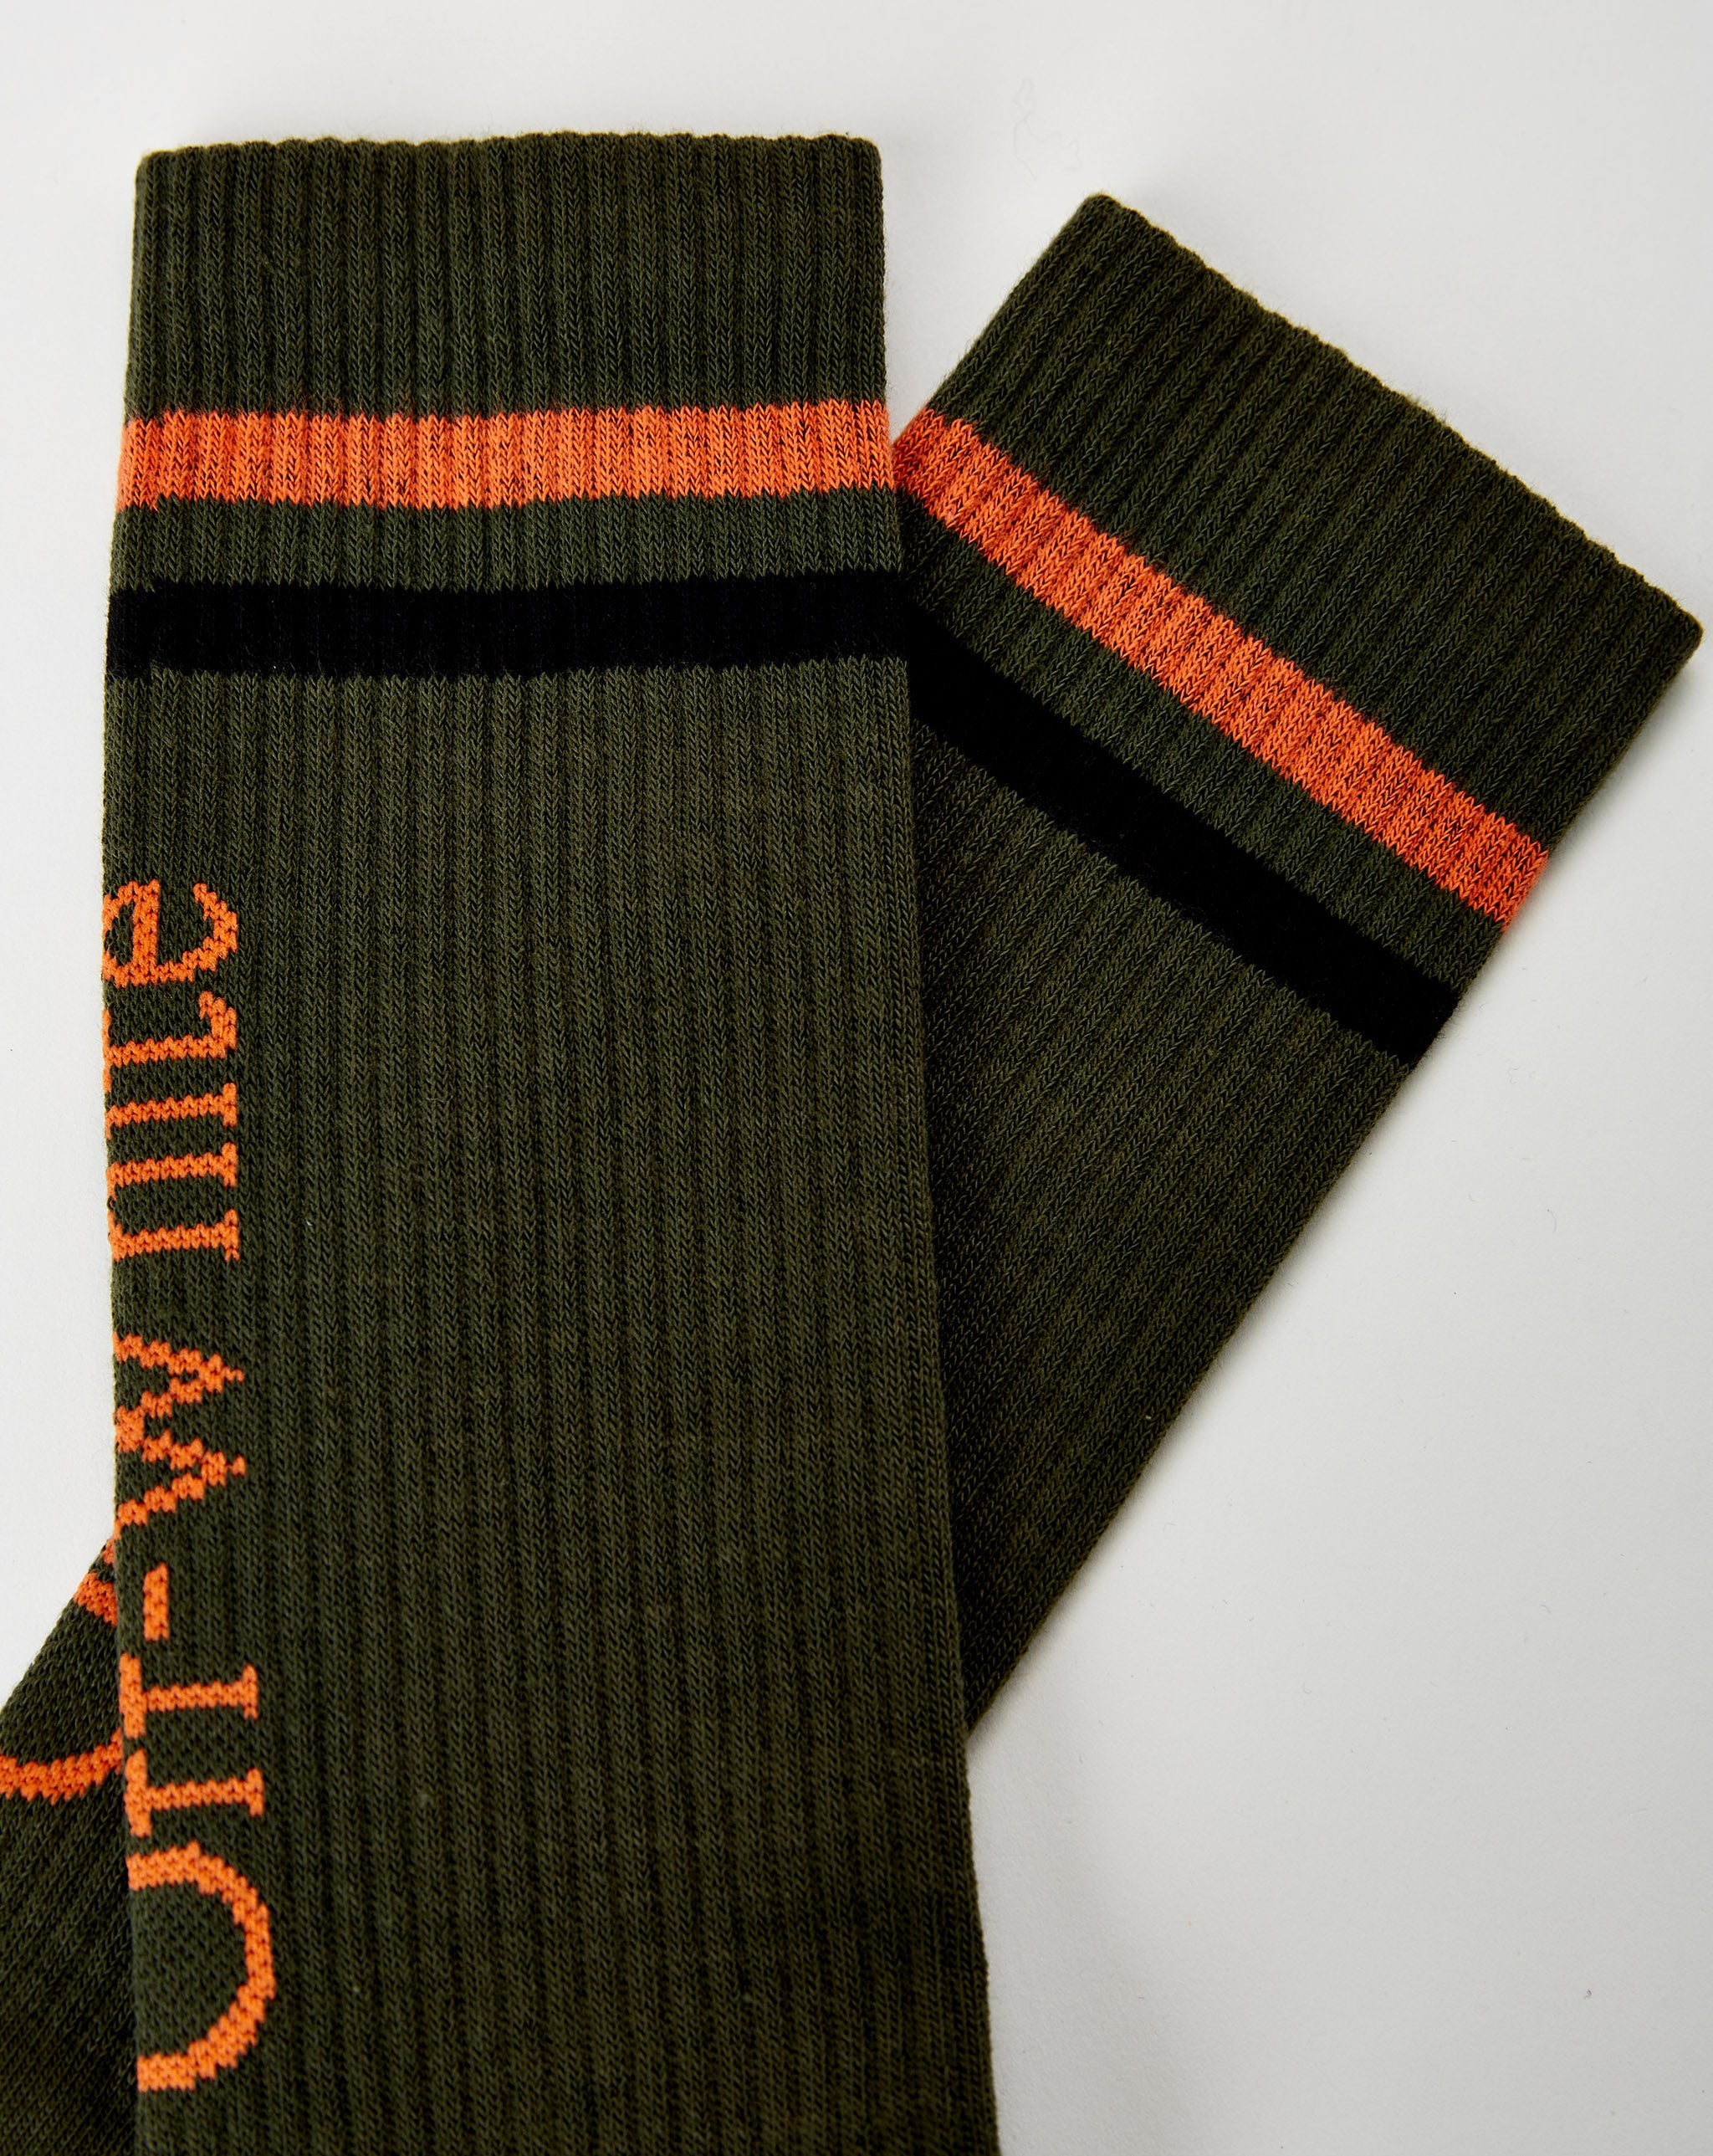 Off-White Stripes Big Logo Long Socks - Rule of Next Accessories